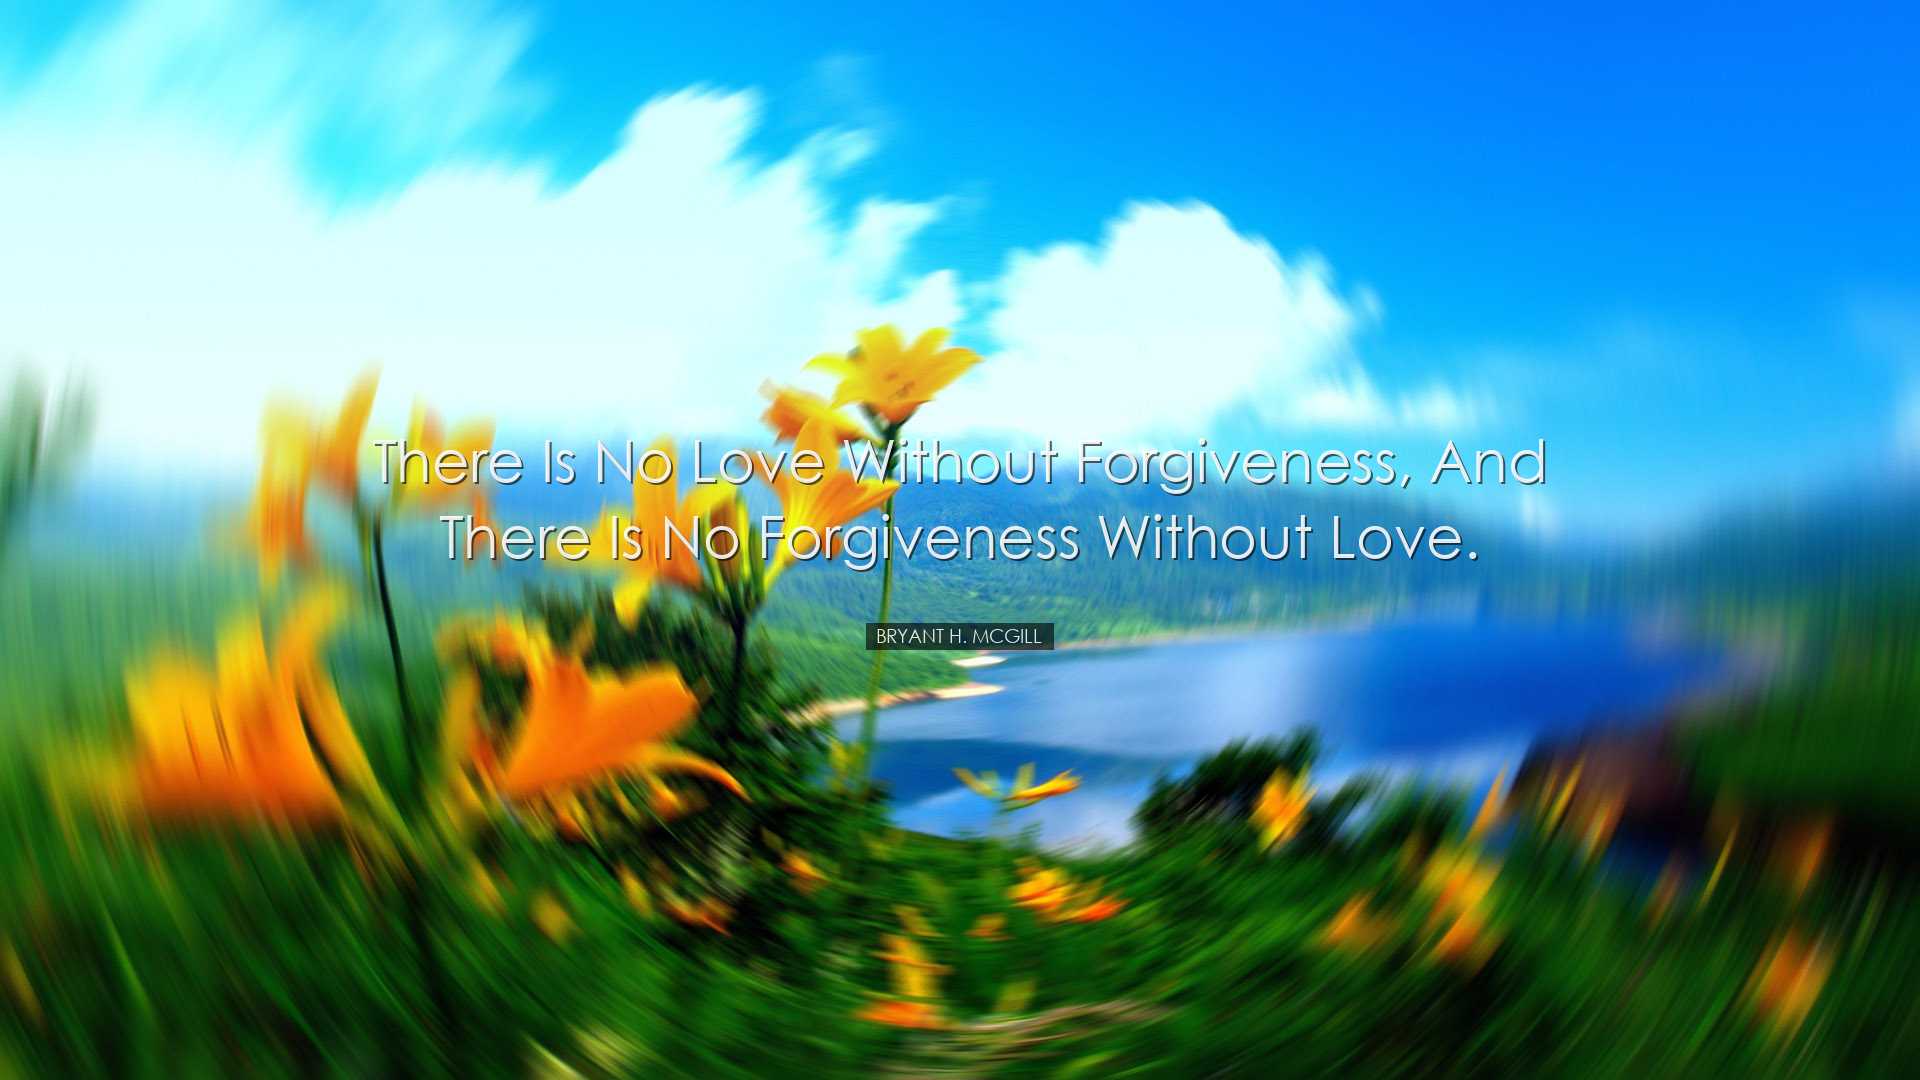 There is no love without forgiveness, and there is no forgiveness